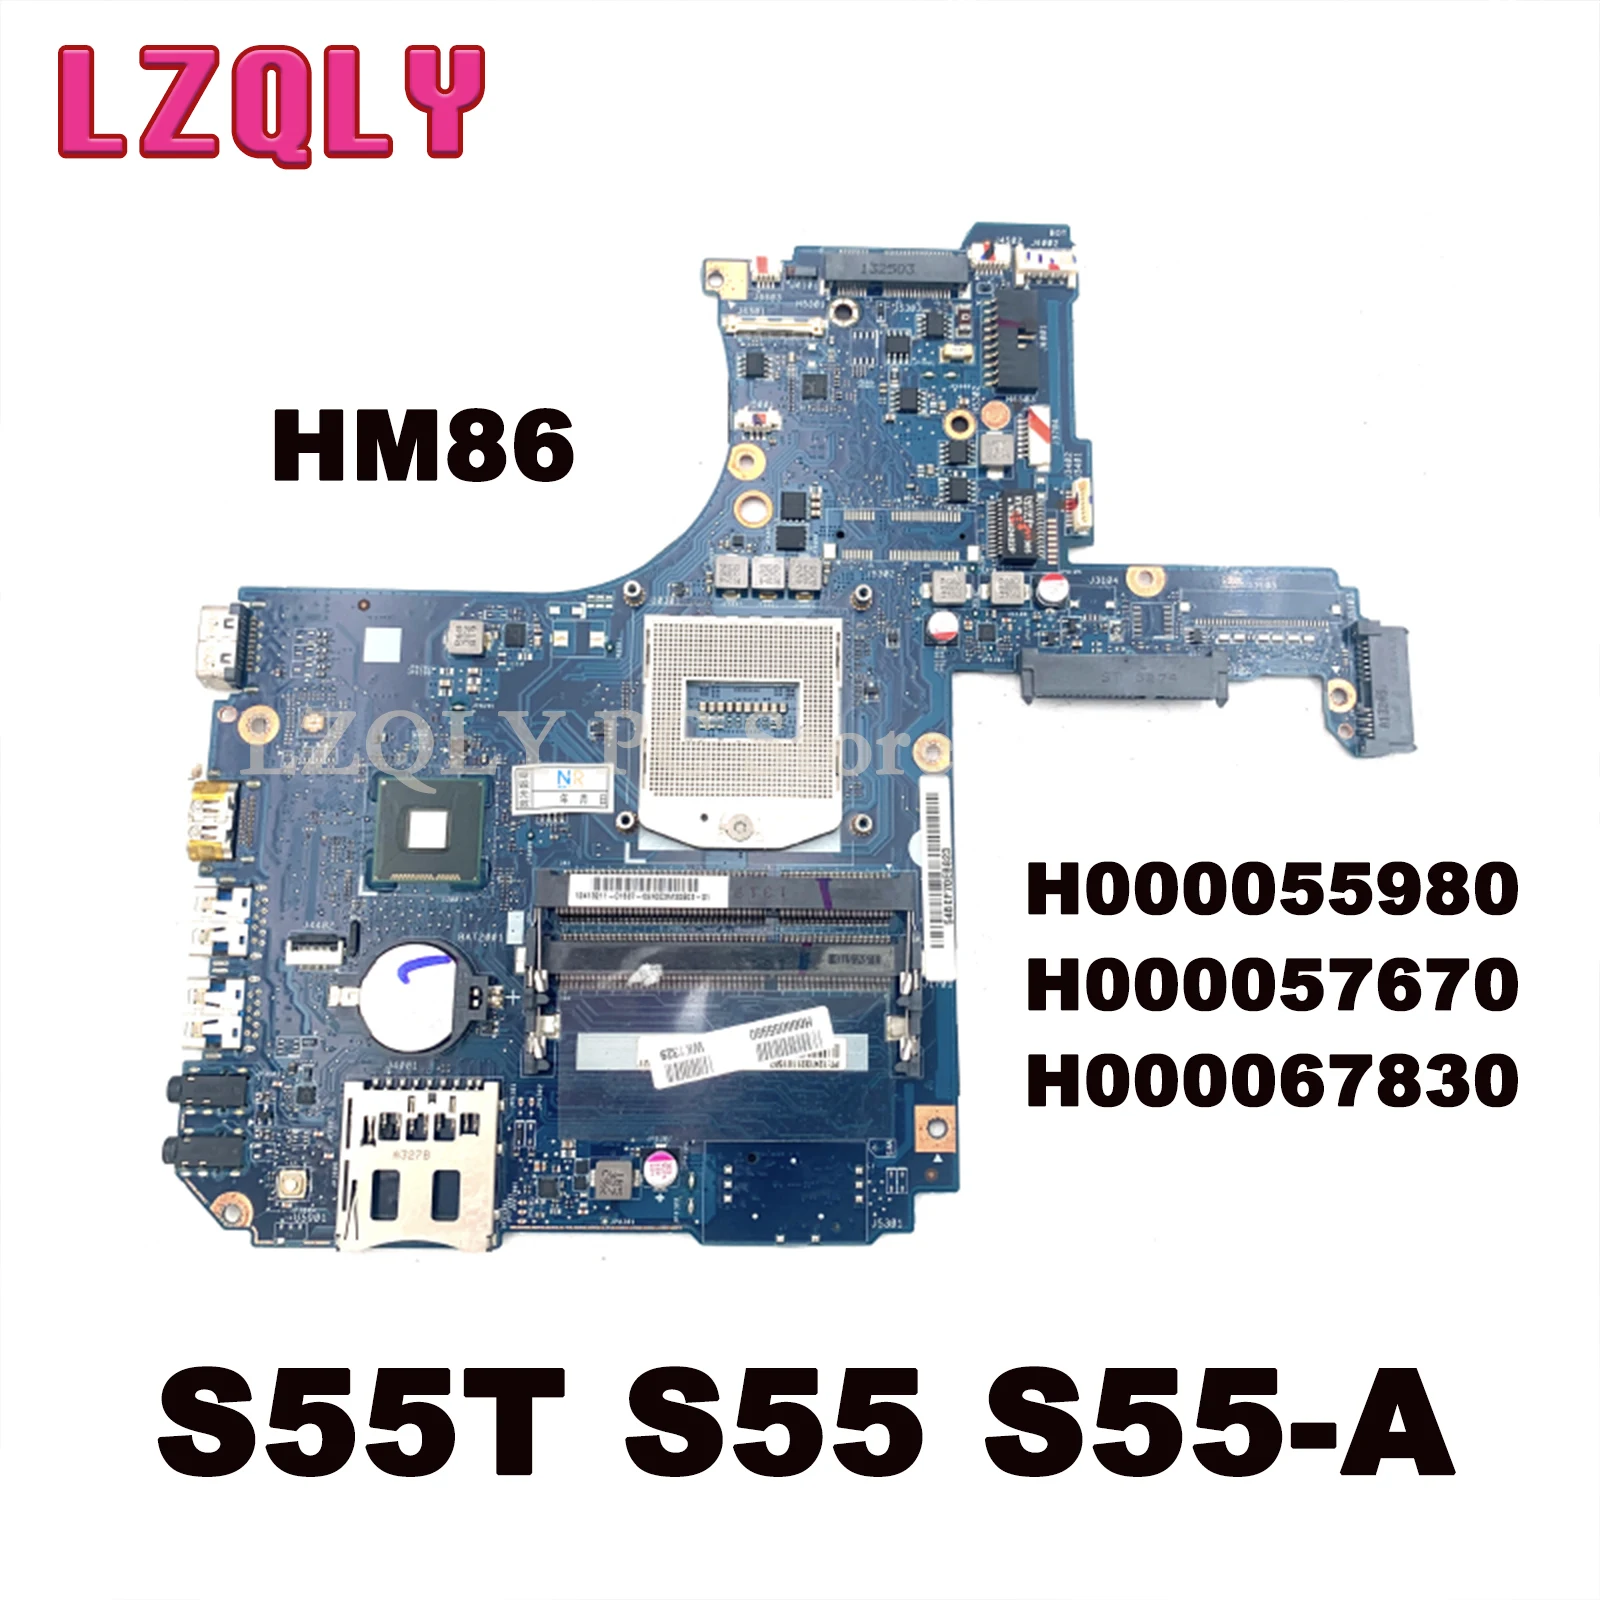 LZQLY For Toshiba Satellite S55T S55 S55-A H000055980 H000057670 H000067830 Laptop Motherboard HM86 UMA DDR3L Main Board